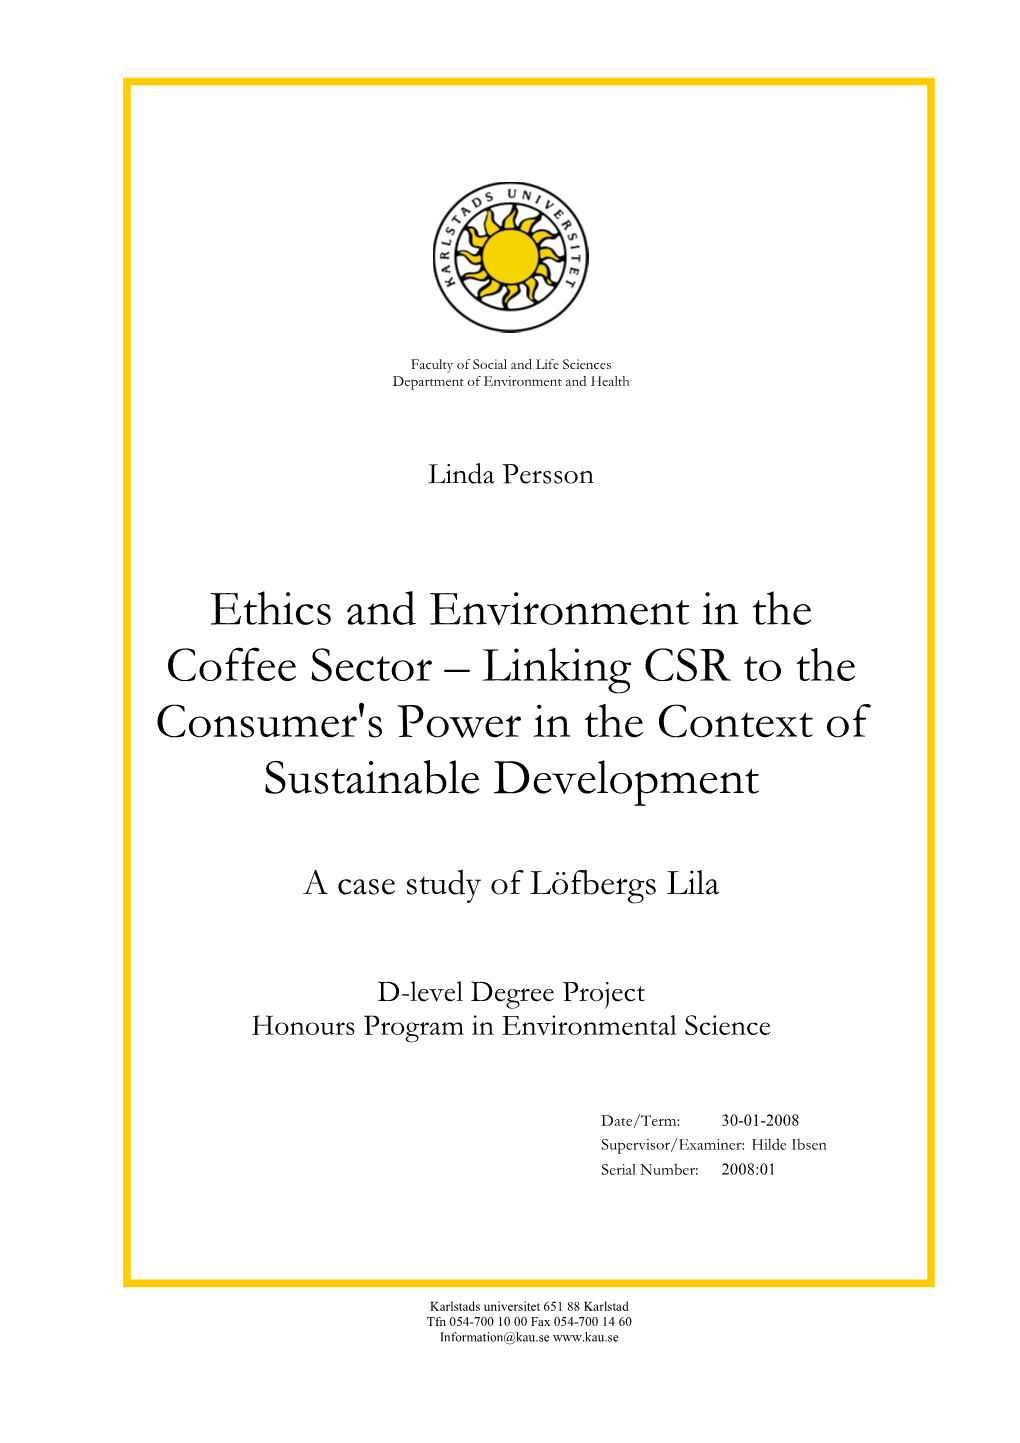 Ethics and Environment in the Coffee Sector – Linking CSR to the Consumer's Power in the Context of Sustainable Development